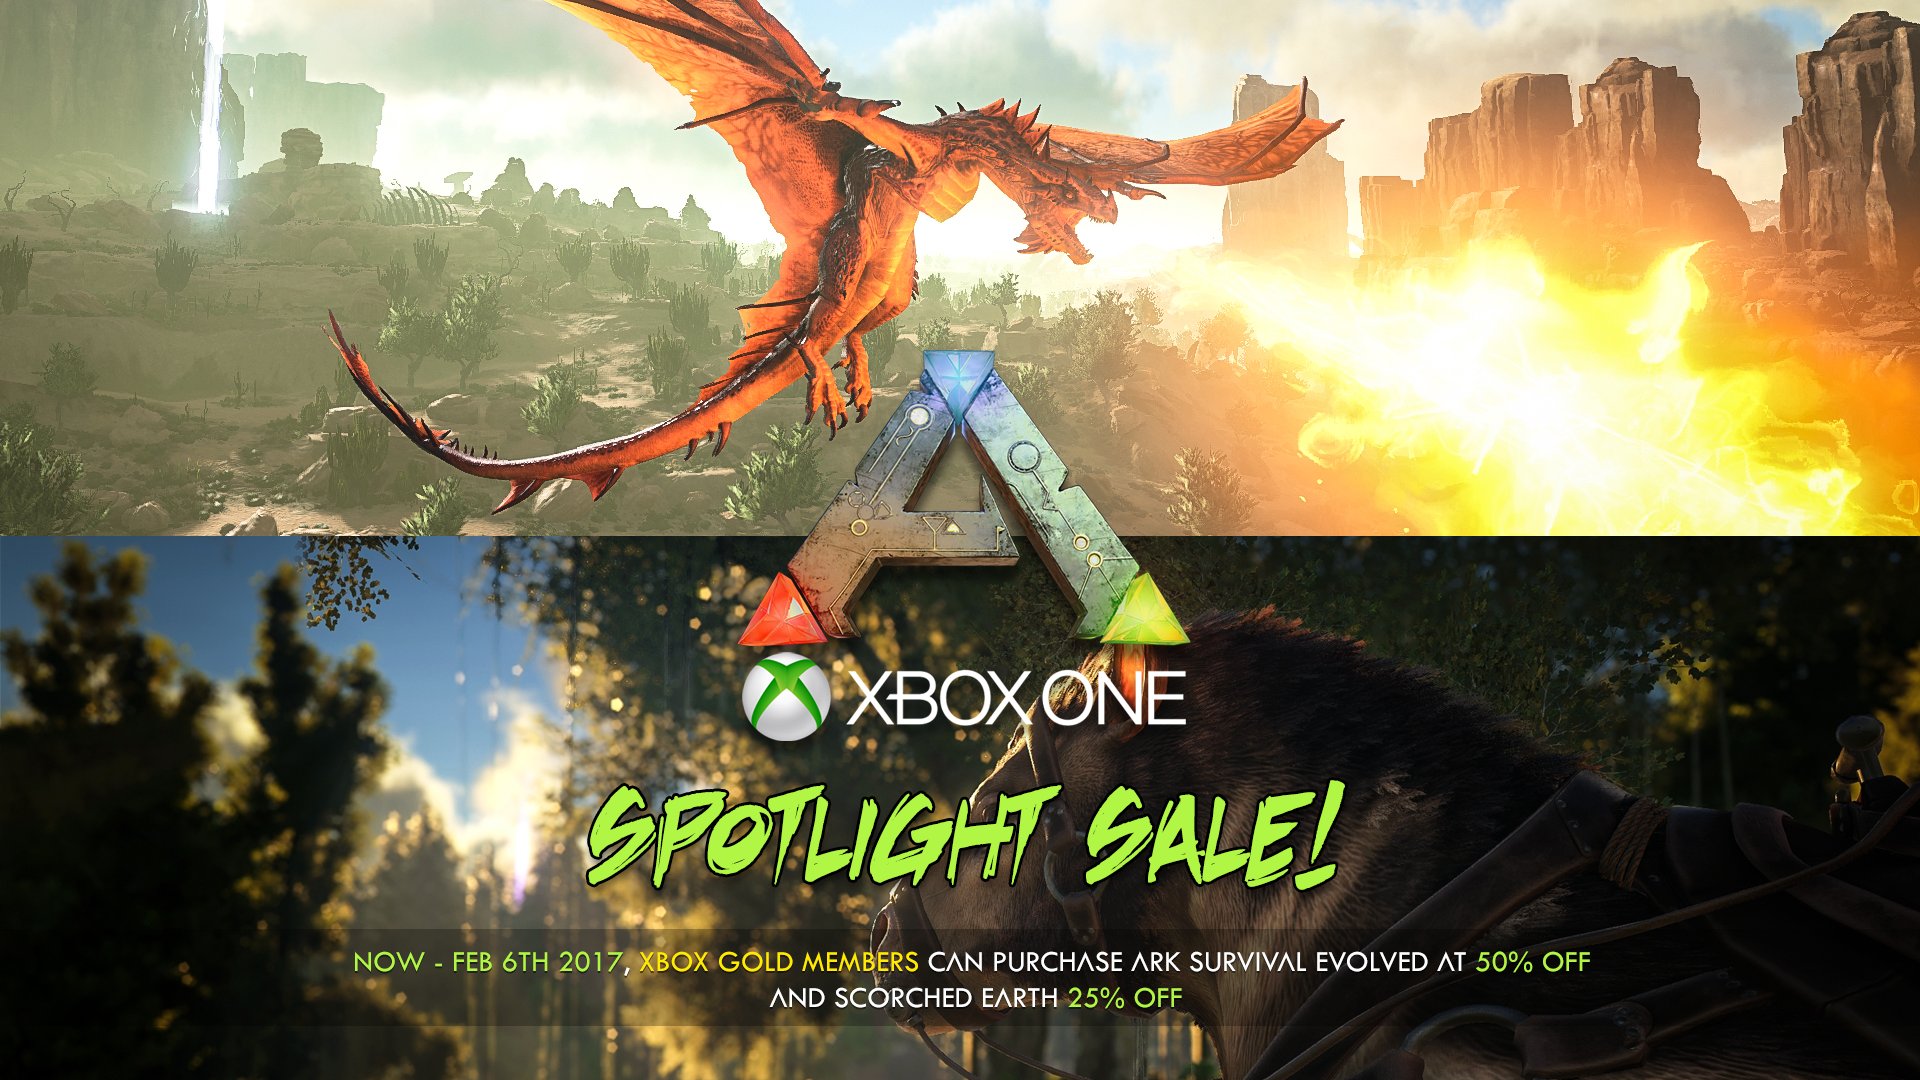 Ark survival scorched earth. Ark Xbox. Ark Xbox one sale. Scorched Earth игра. Ark Survival Evolved Scorched Earth.